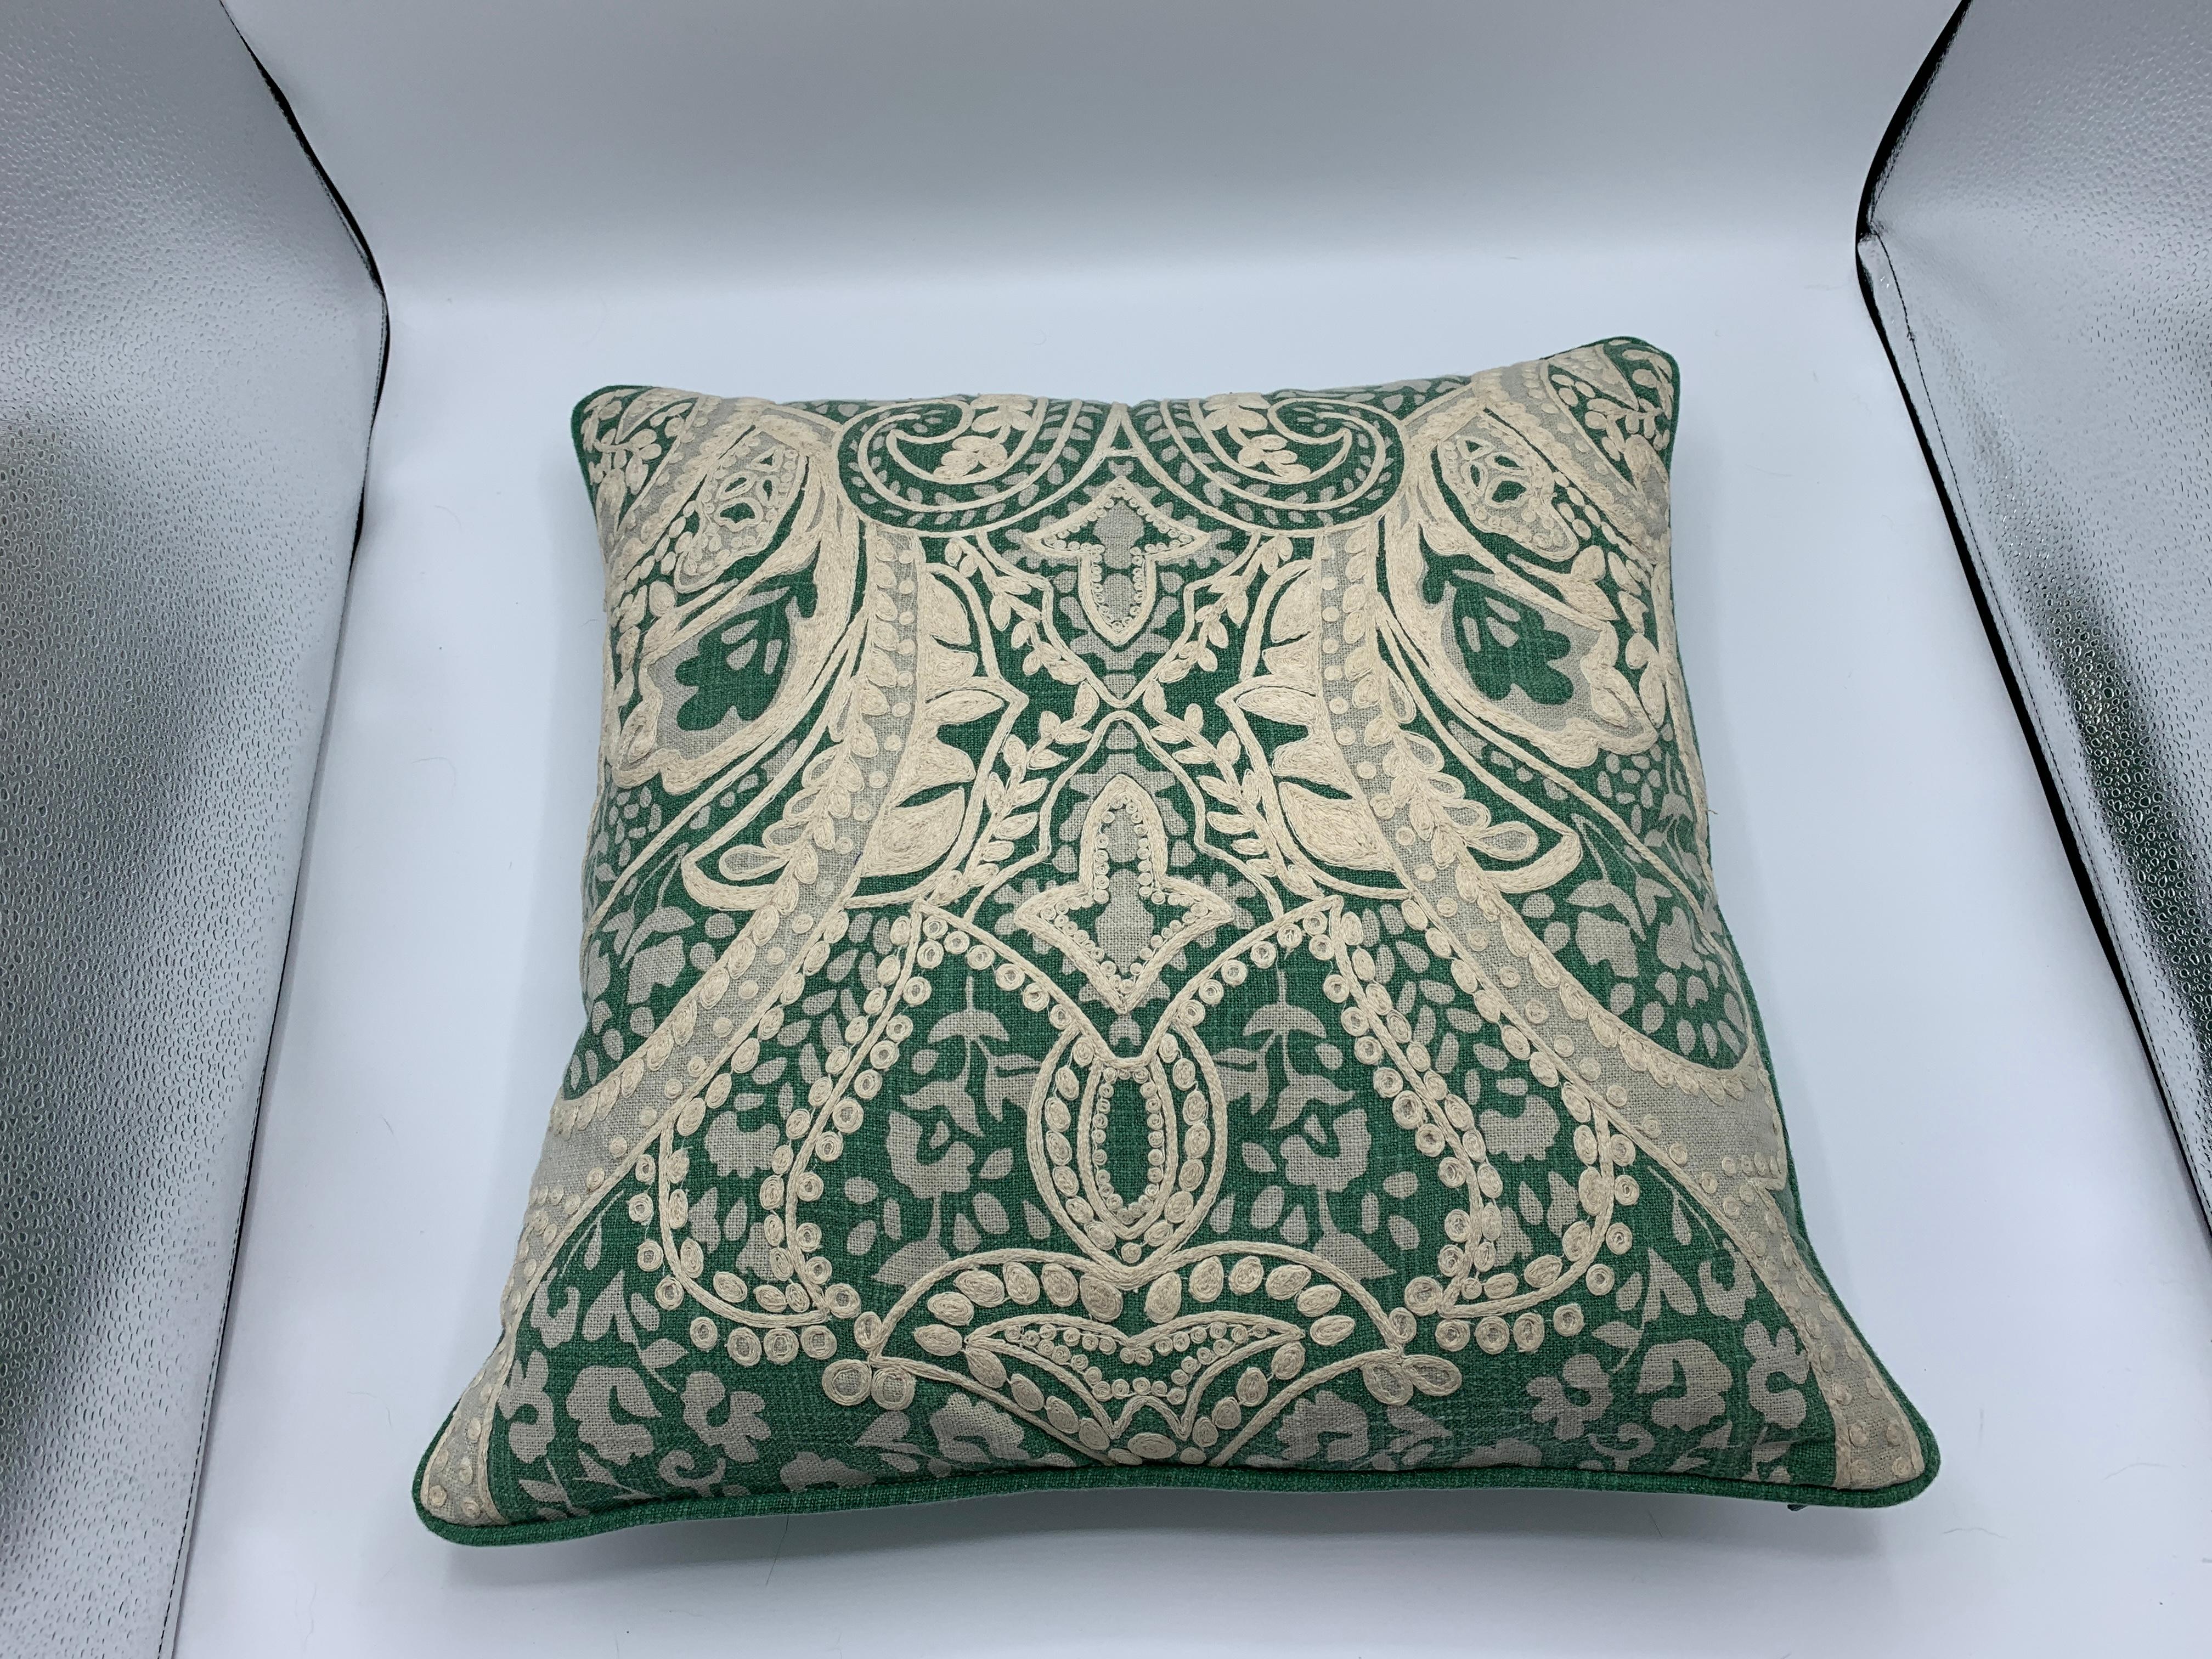 Green and White Linen Pillows with Damask Embroidery, Pair In Good Condition For Sale In Richmond, VA